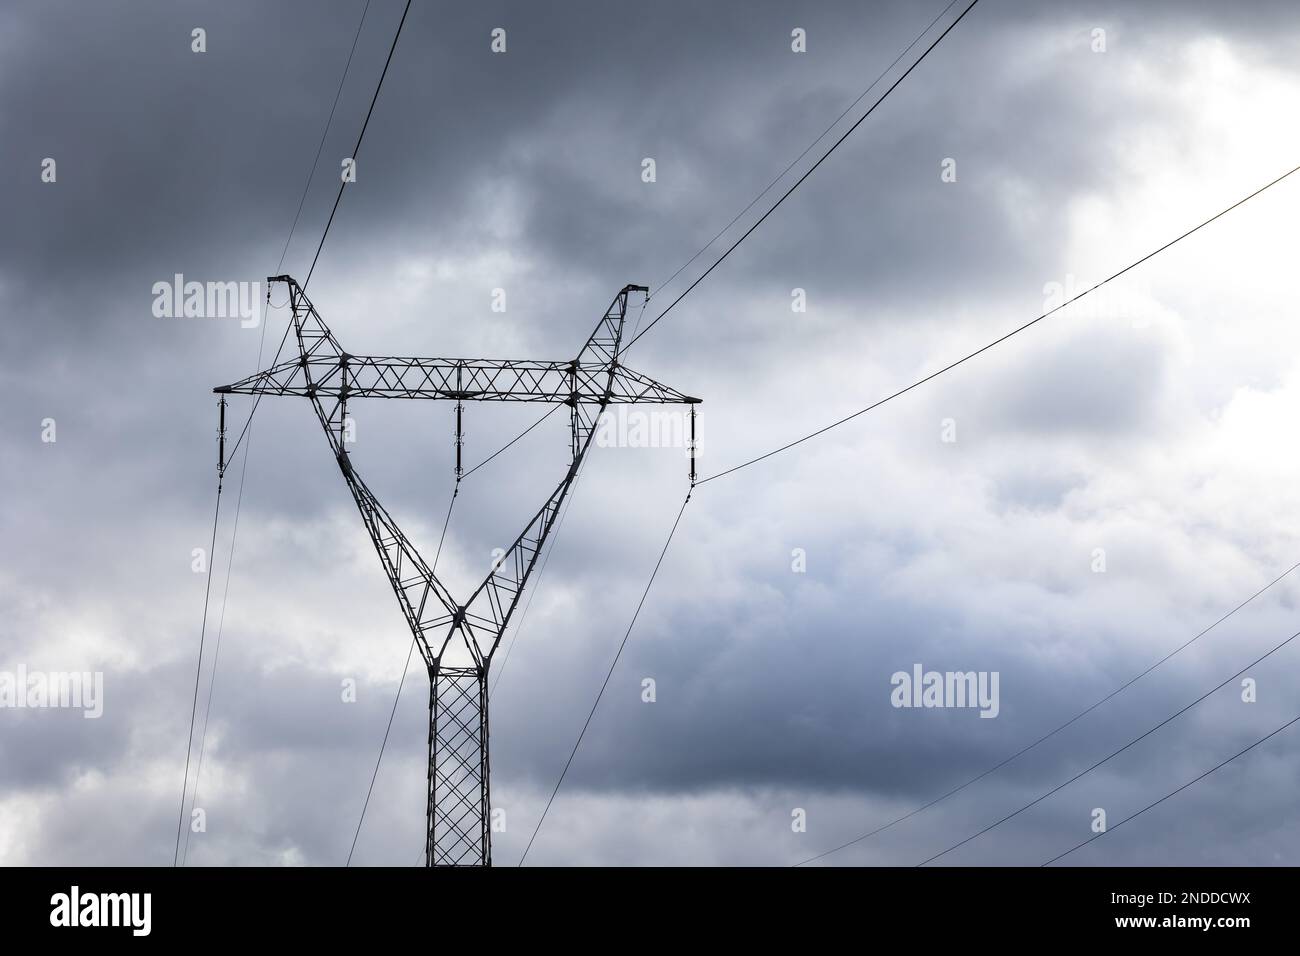 The silhouette of a high-voltage pylon against a dramatically cloudy sky. Development of high-voltage transmission networks Stock Photo